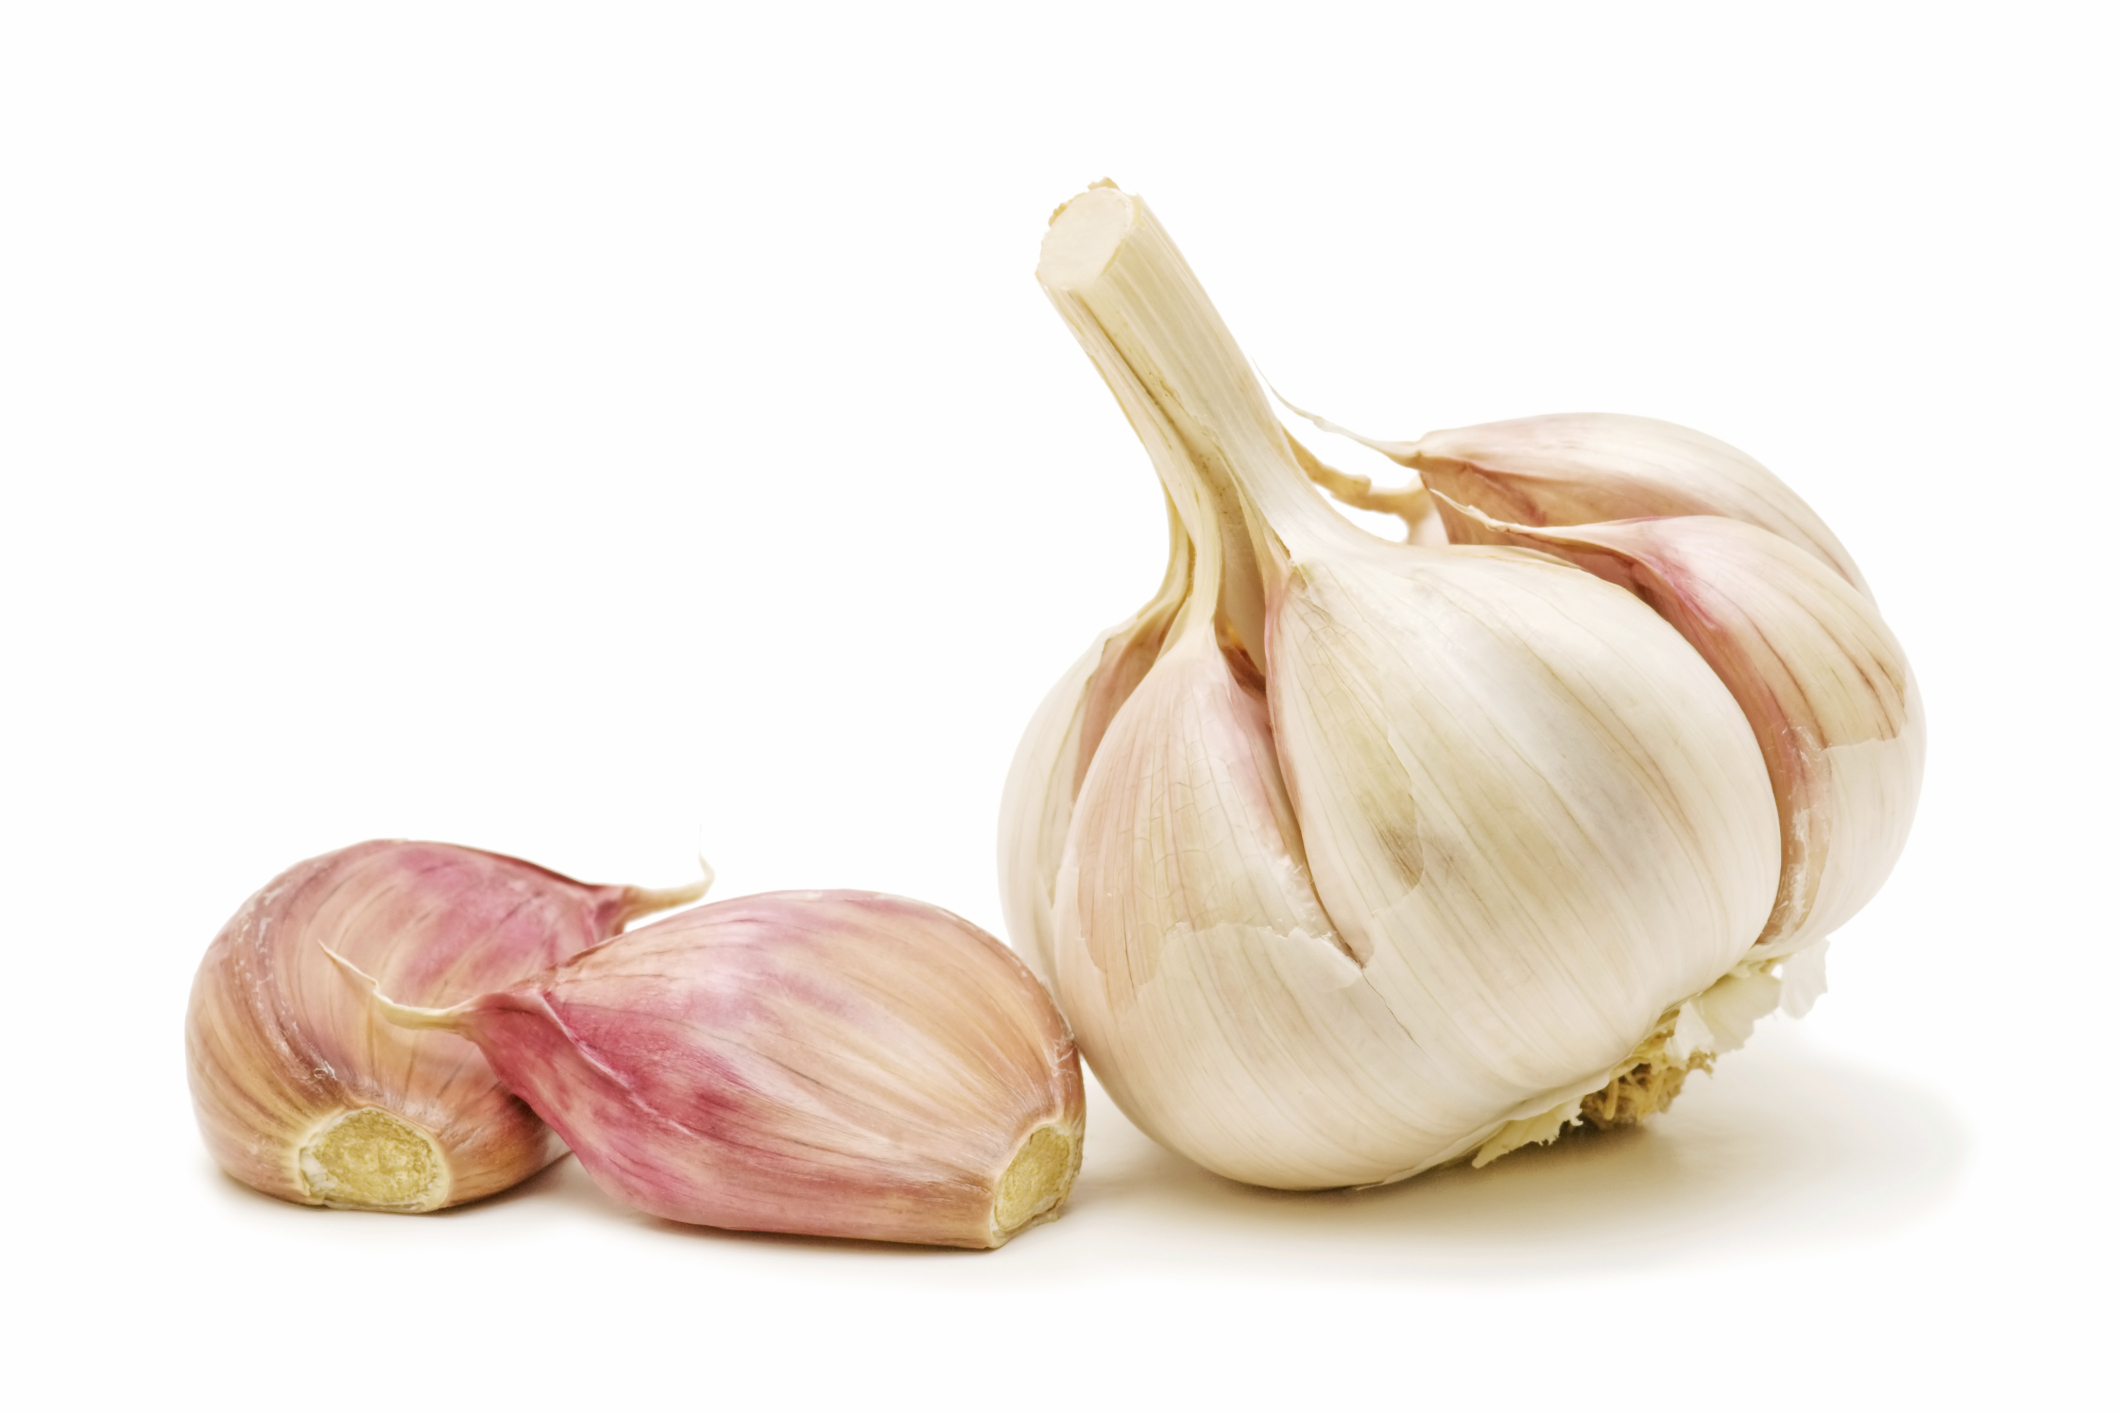 what are the signs of garlic poisoning in dogs